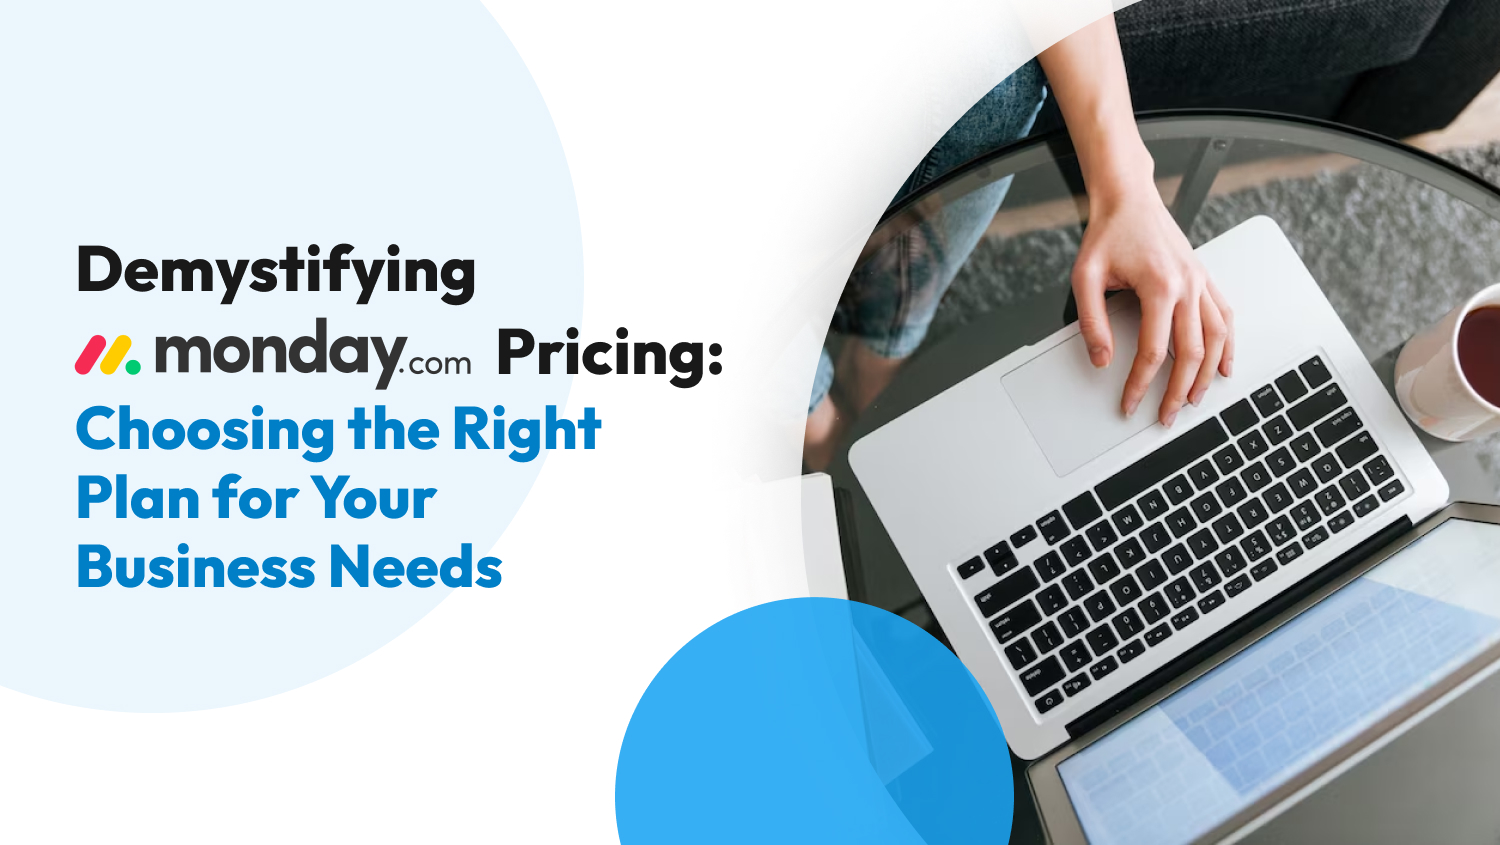 Demystifying Monday.com Pricing: Choosing the Right Plan for Your Business Needs